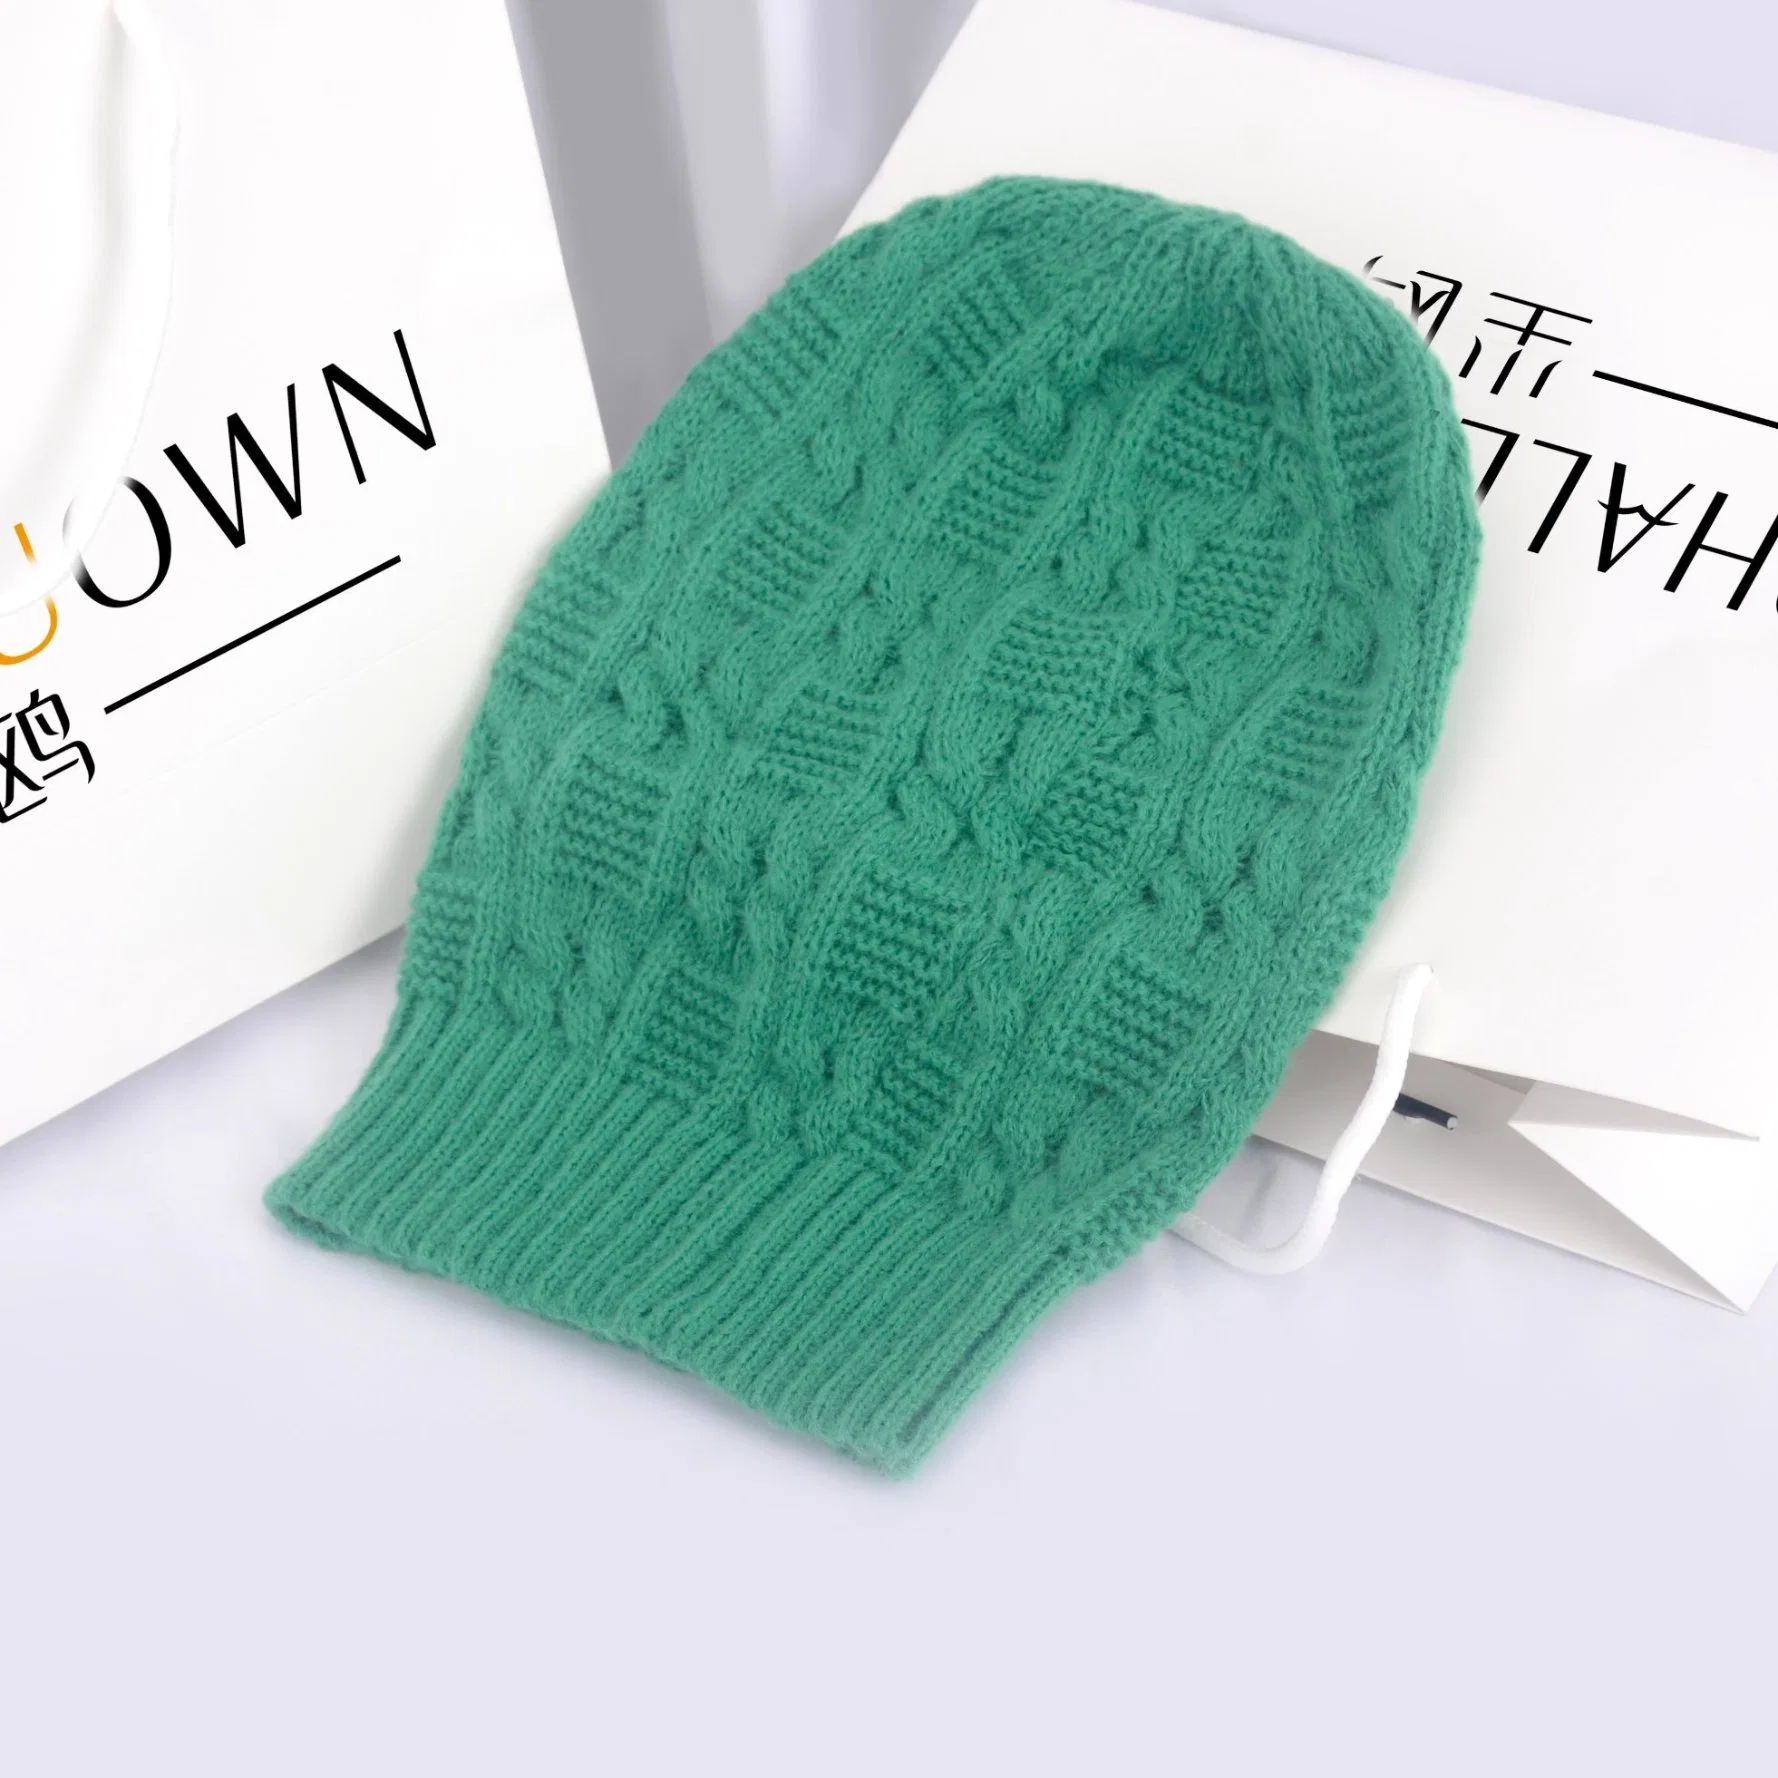 Slouchy Over-Sized Cable Slable Knitted Beanie Hat